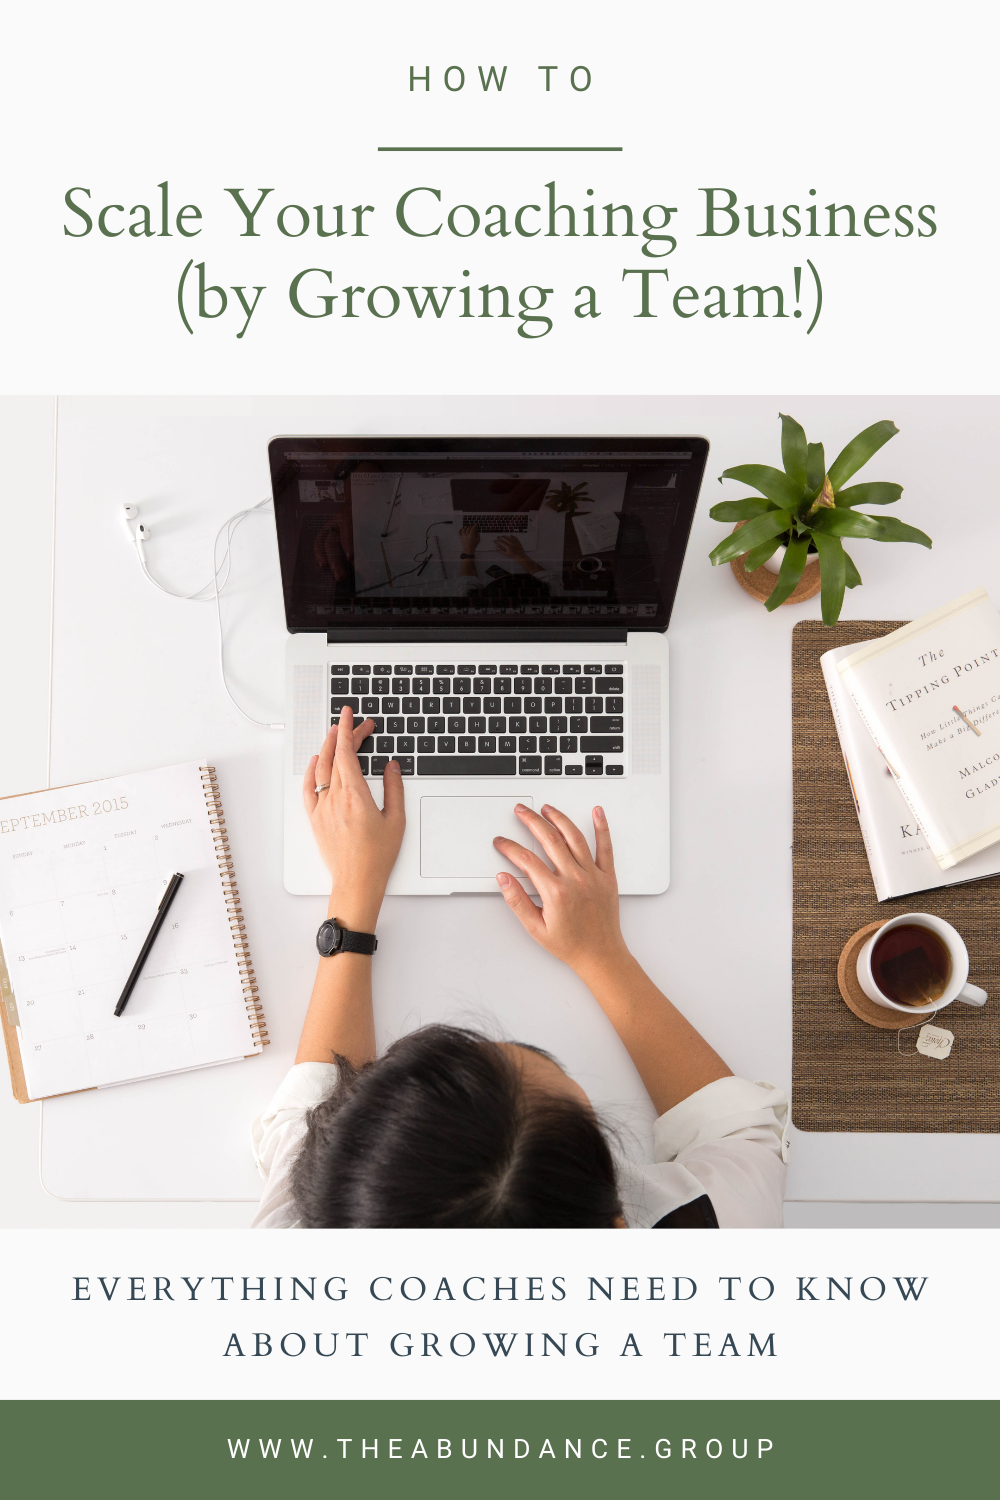 How to scale your coaching business by growing a team - Everything coaches need to know about growing a team